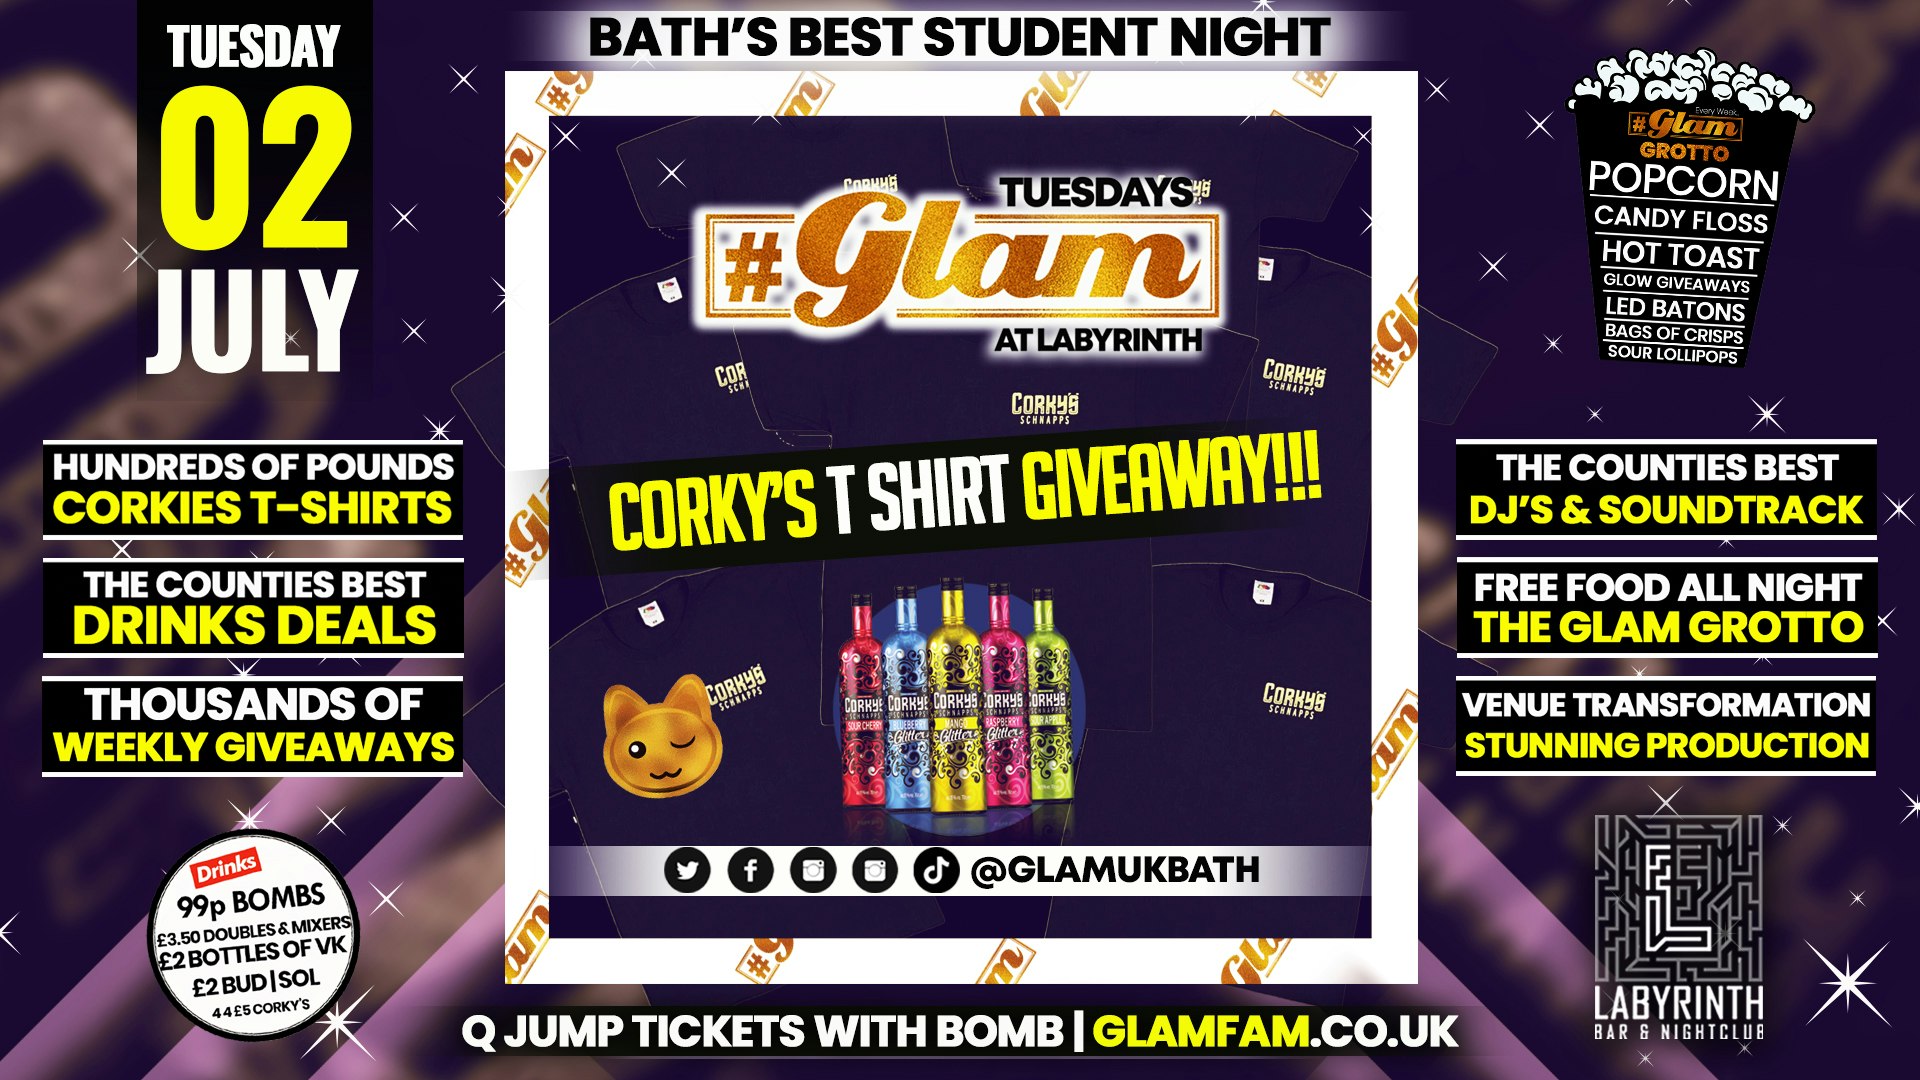 Glam – CORKY’S T SHIRT GIVEAWAY! 👕👚 Bath’s Biggest Week Night | Tuesdays at Labs 😻